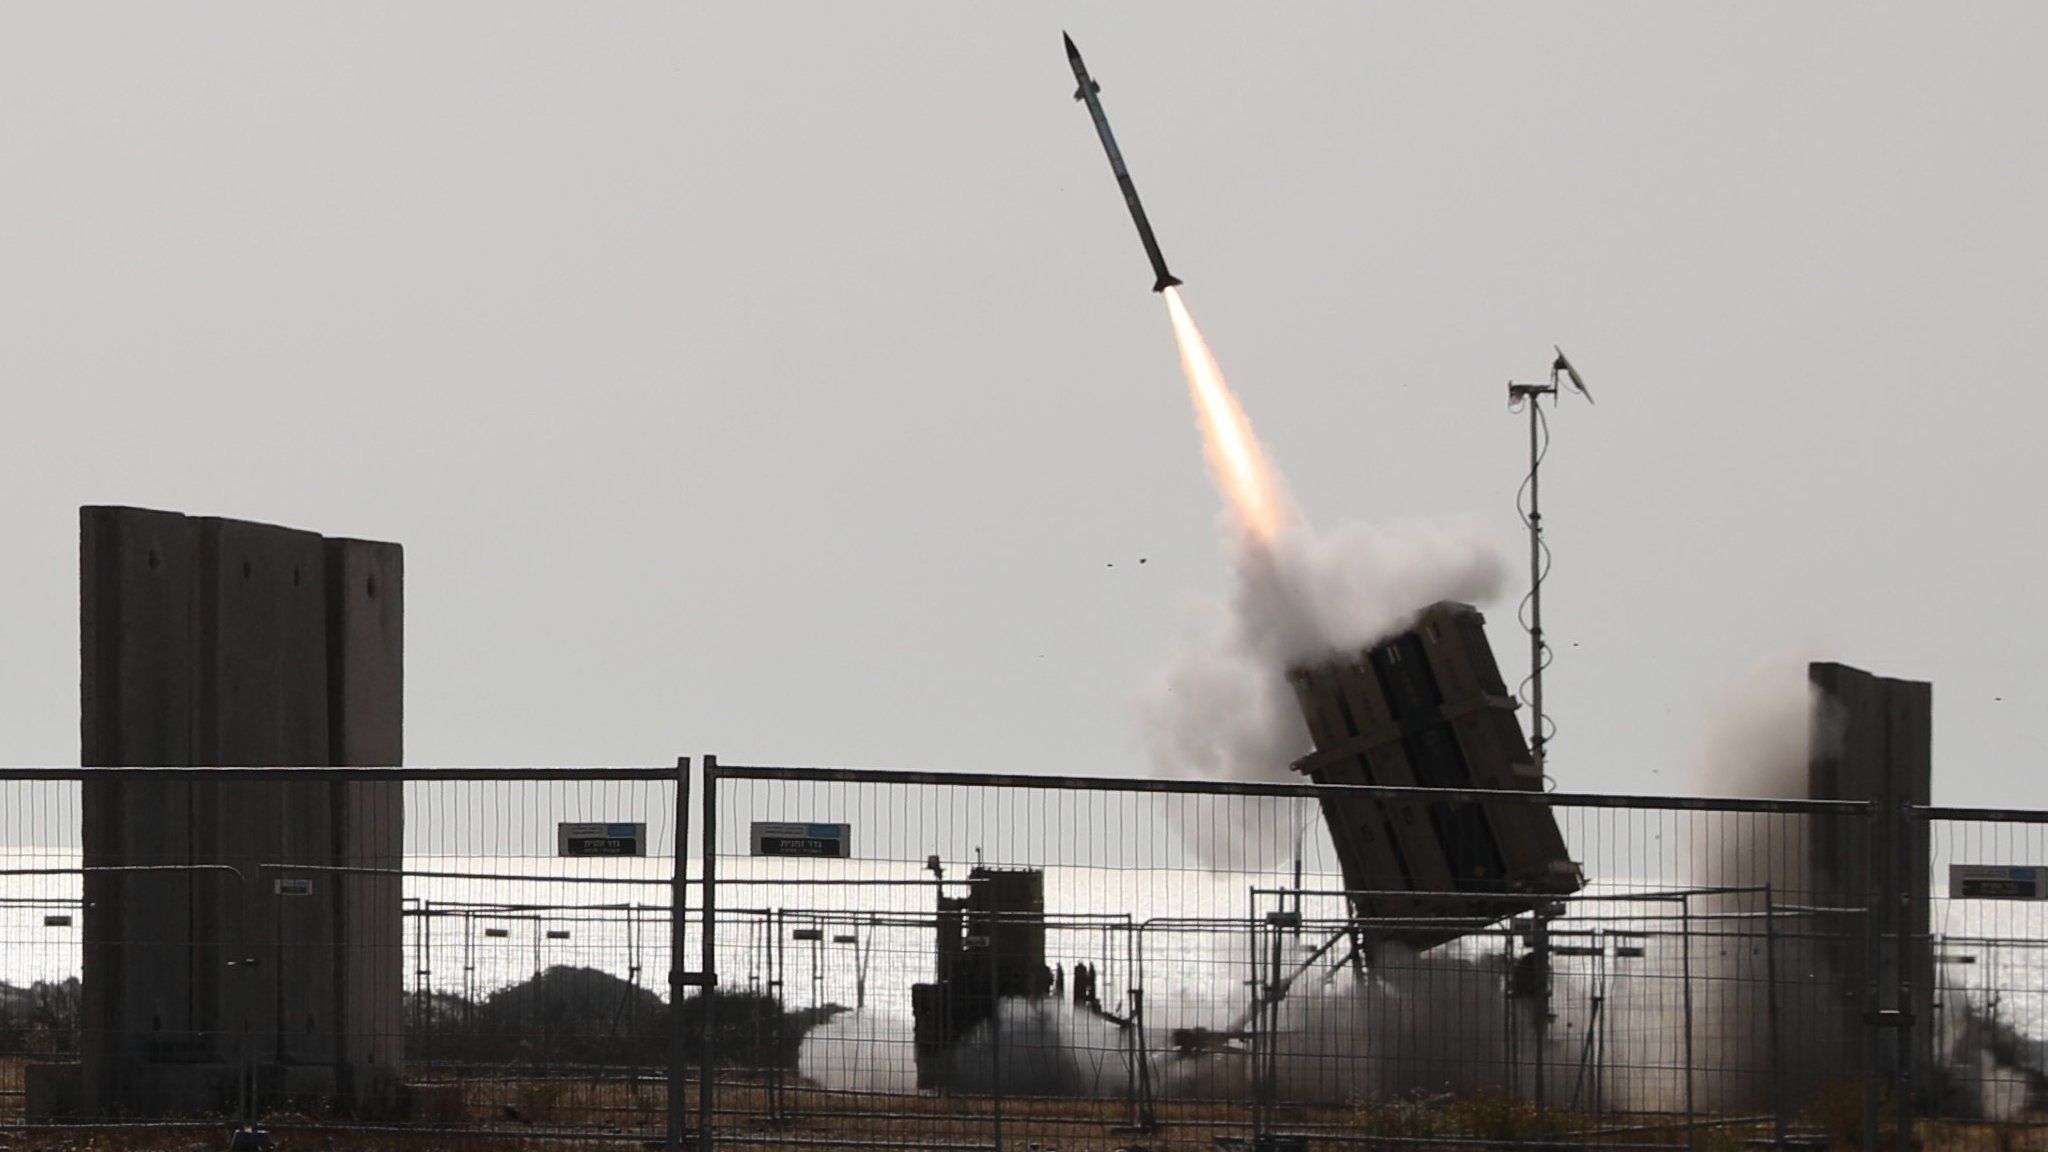 An Israeli Iron Dome battery near Ashkelon launches an interceptor missile at a rocket fired from Gaza by Palestinian militants (11 May 2021)